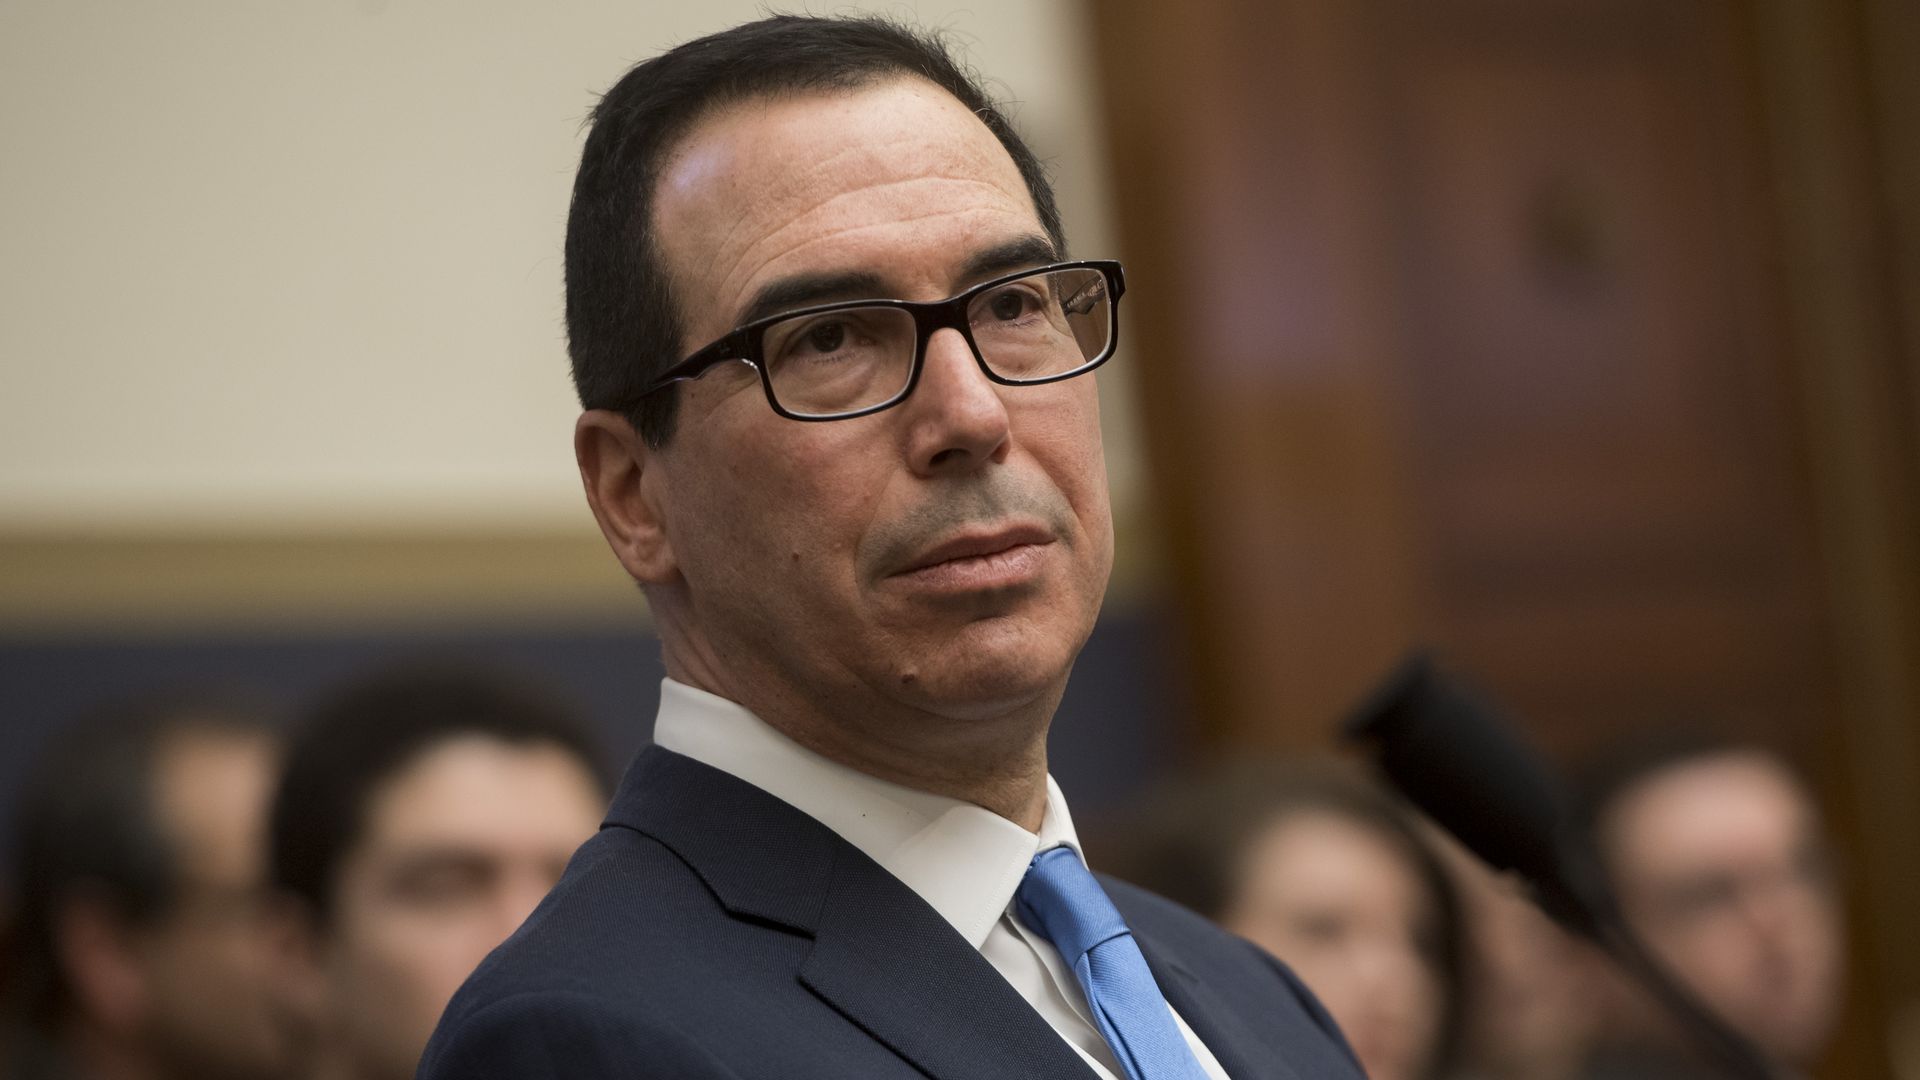 Treasury Secretary Steven Mnuchin, who wants the Justice Department to take a tougher look at major technology companies.